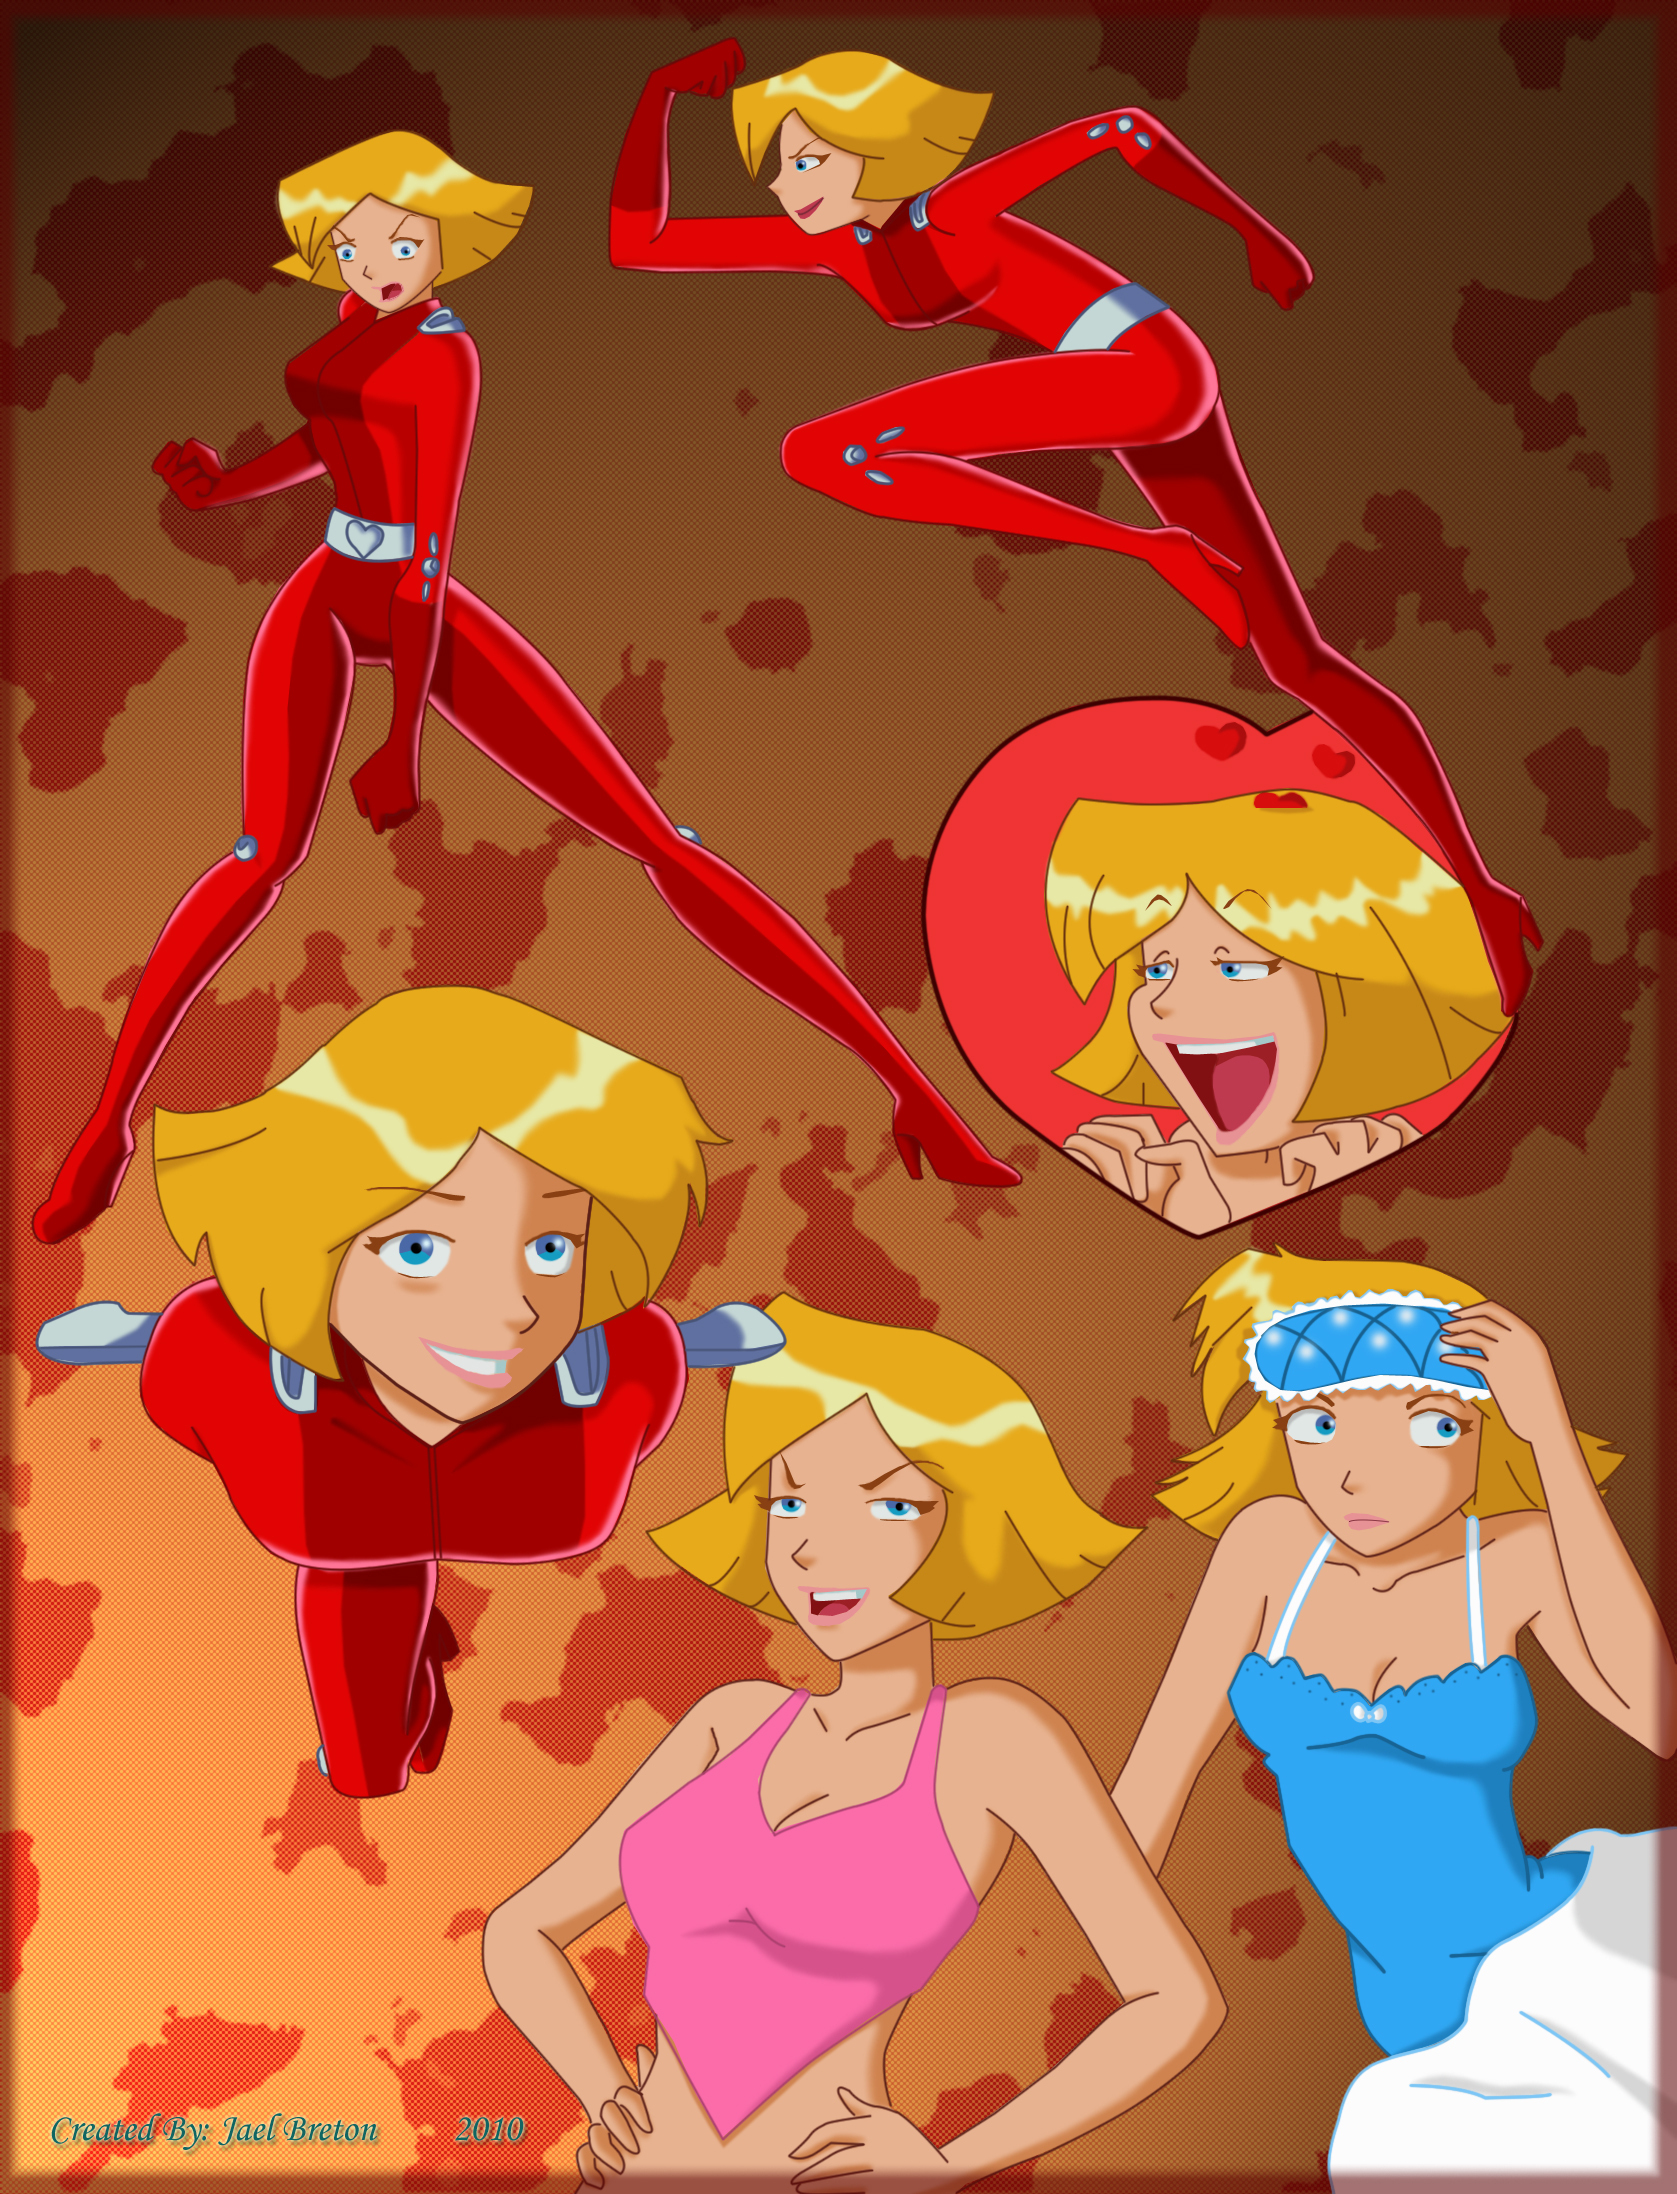 Spies nackt totally sex totally spies